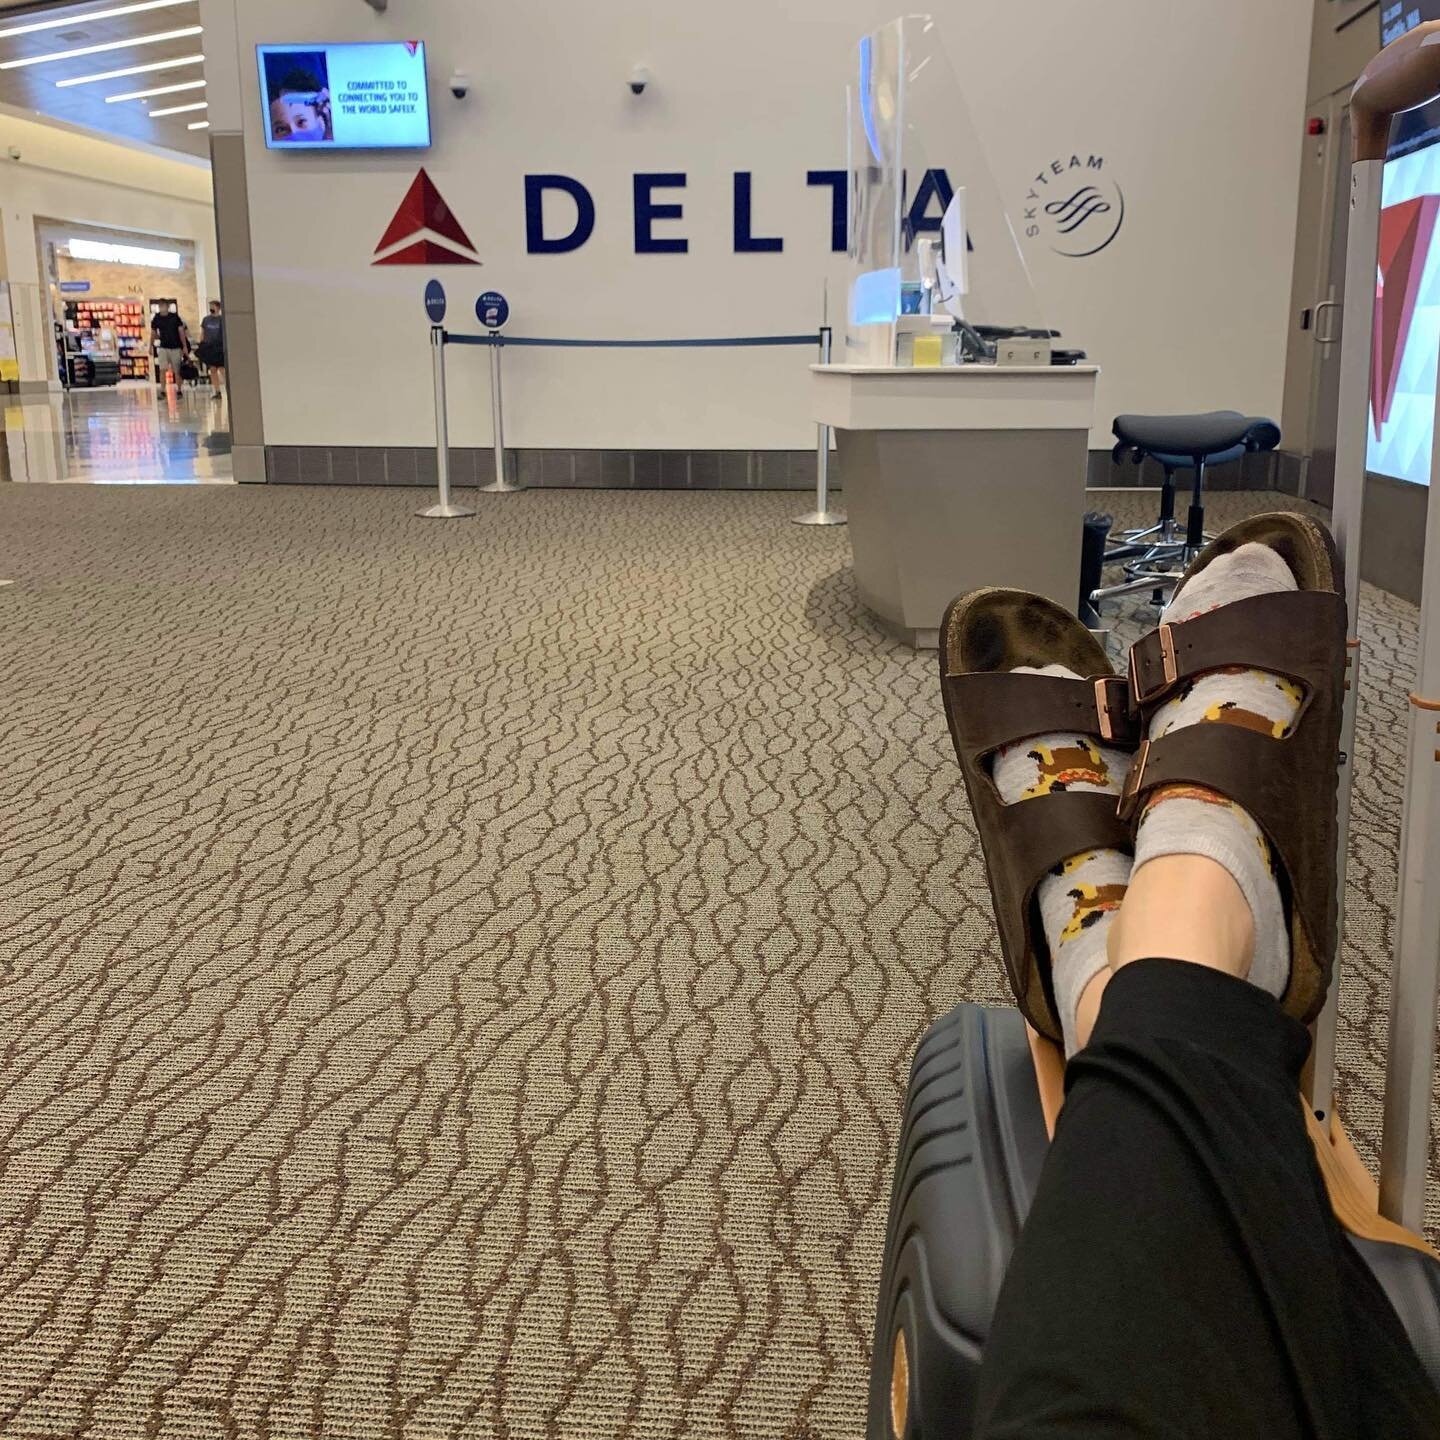 The best way to find answers is to get them yourself! Heading to Virginia for book research! 🤓

#bookstagram #travel #book #writersofinstagram #writingcommunity #cutesocks #biography #familyhistory #writingtrip